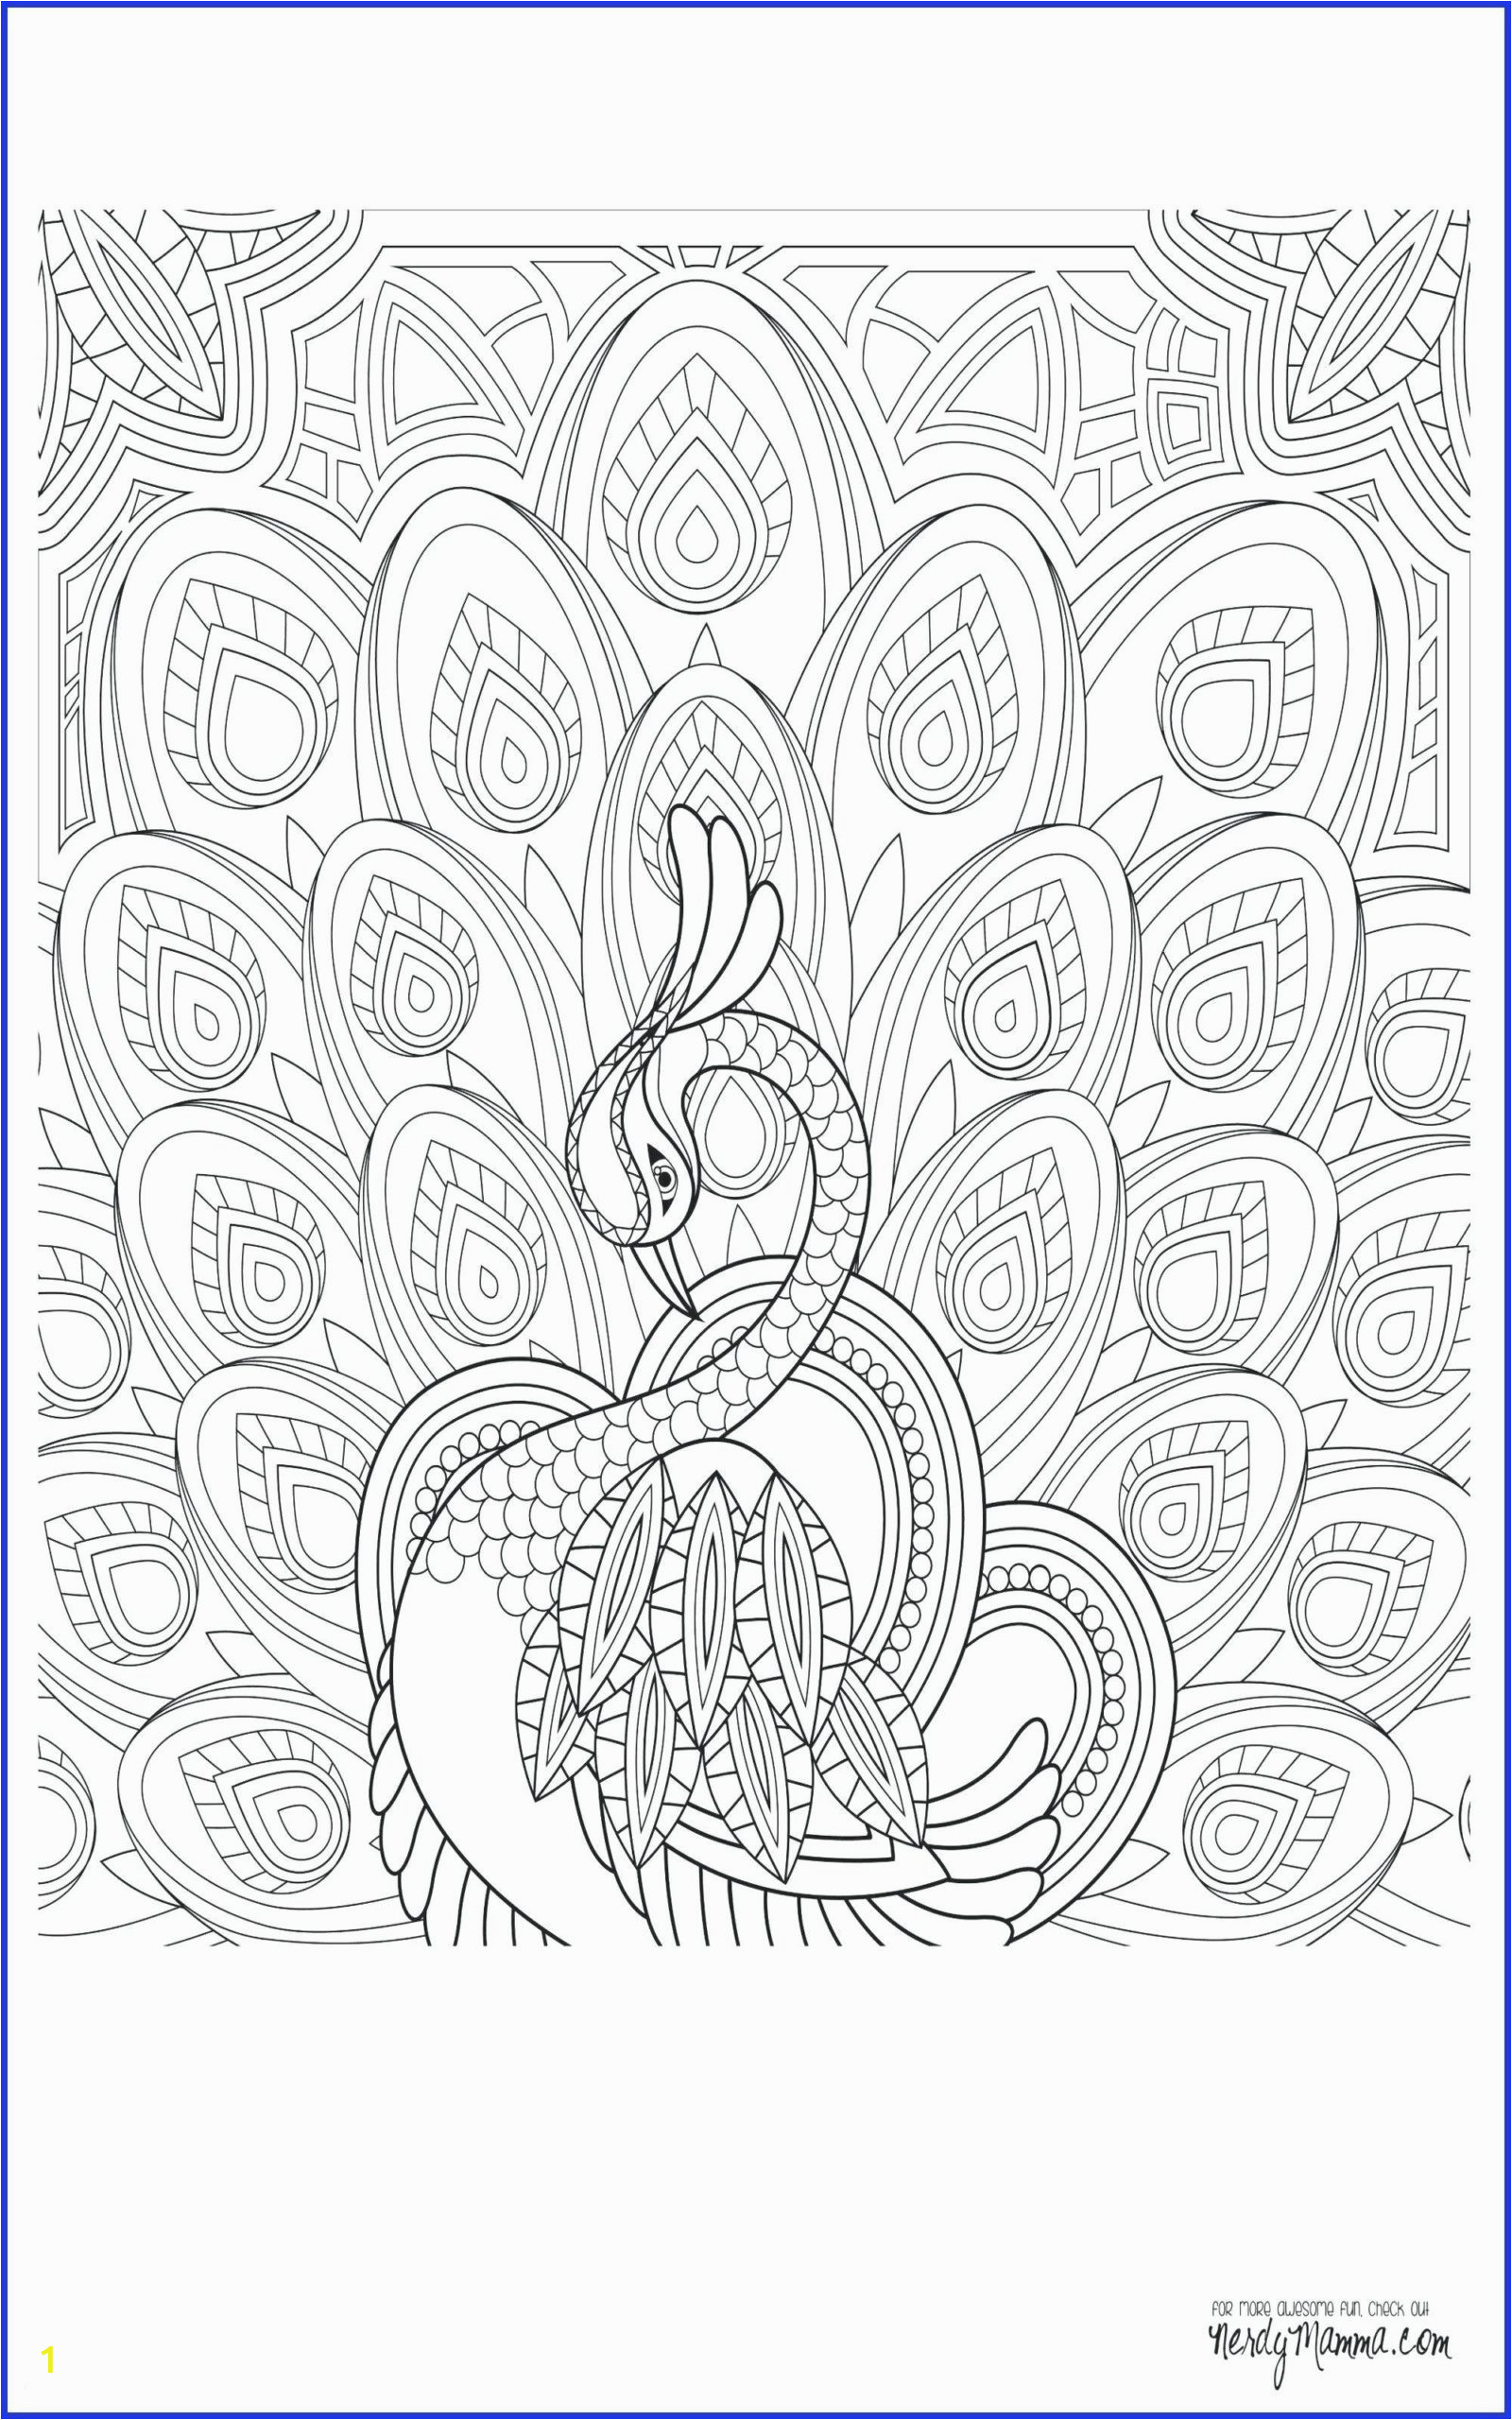 Free Printable Biblical Coloring Pages Coloring Book Free Printable Advanced Coloring Pages